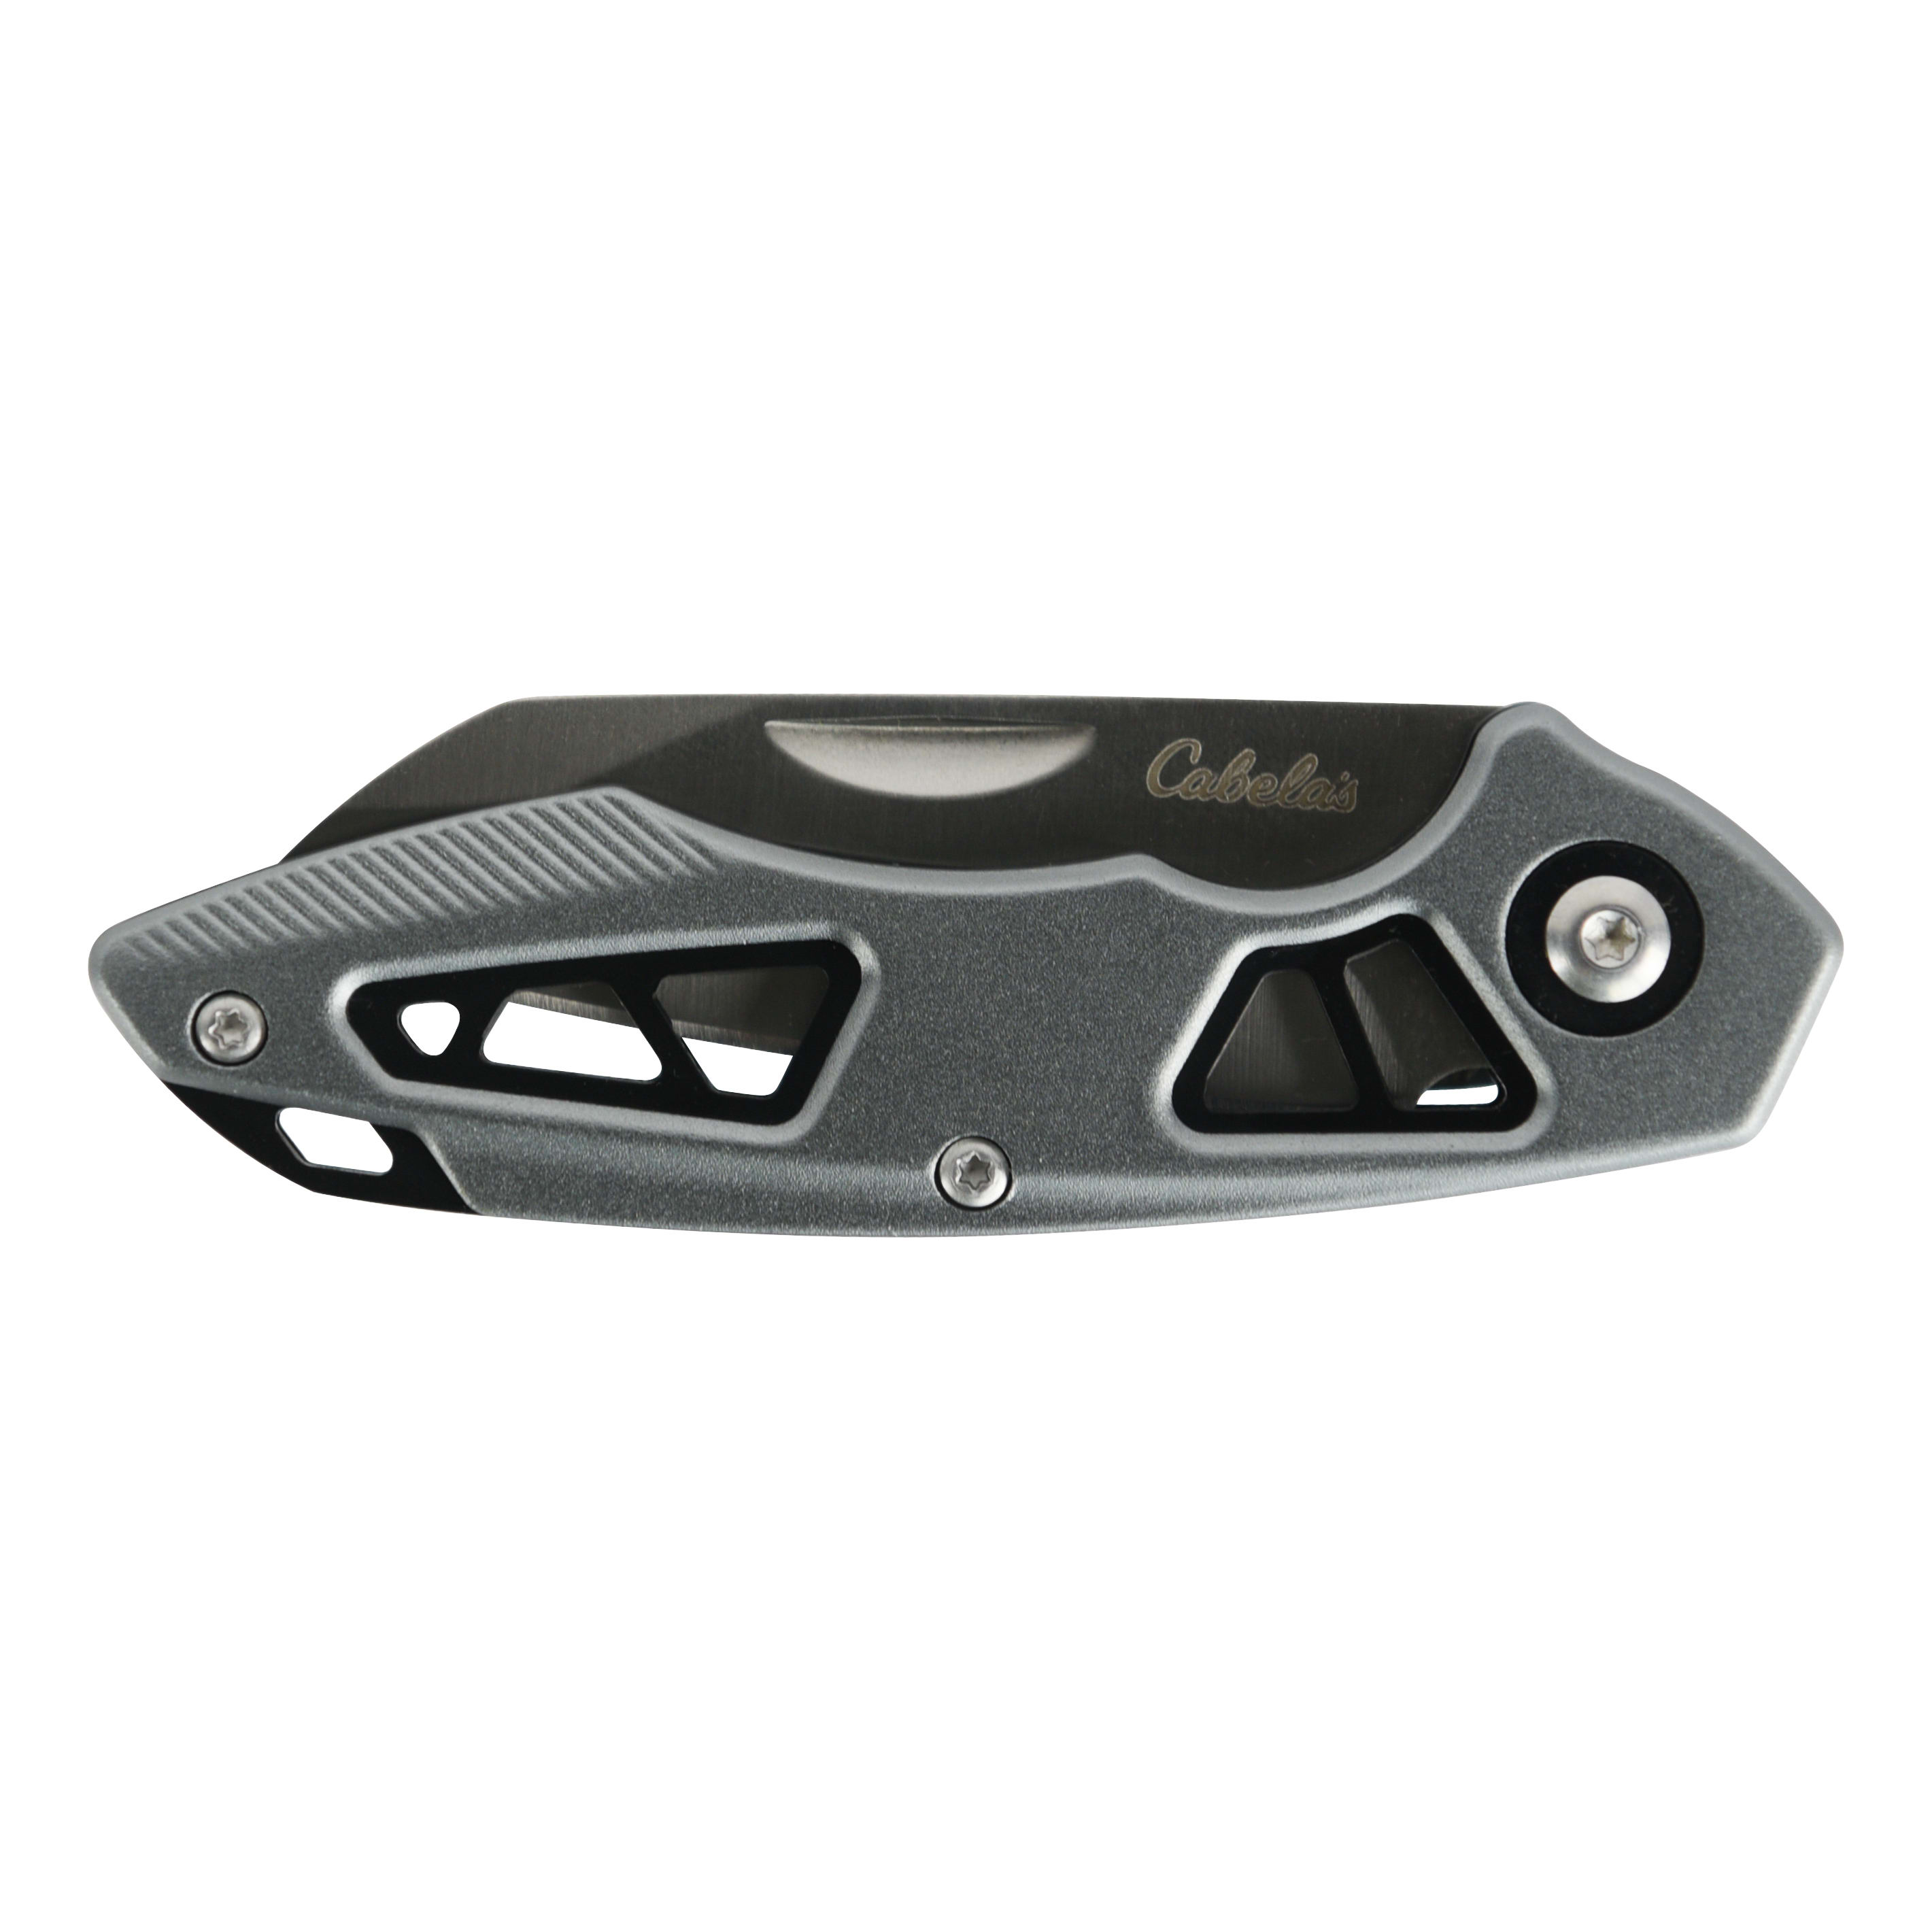 Cabela's Knife and Flashlight Combo with Waterproof Case - Grey - Knife - Closed View